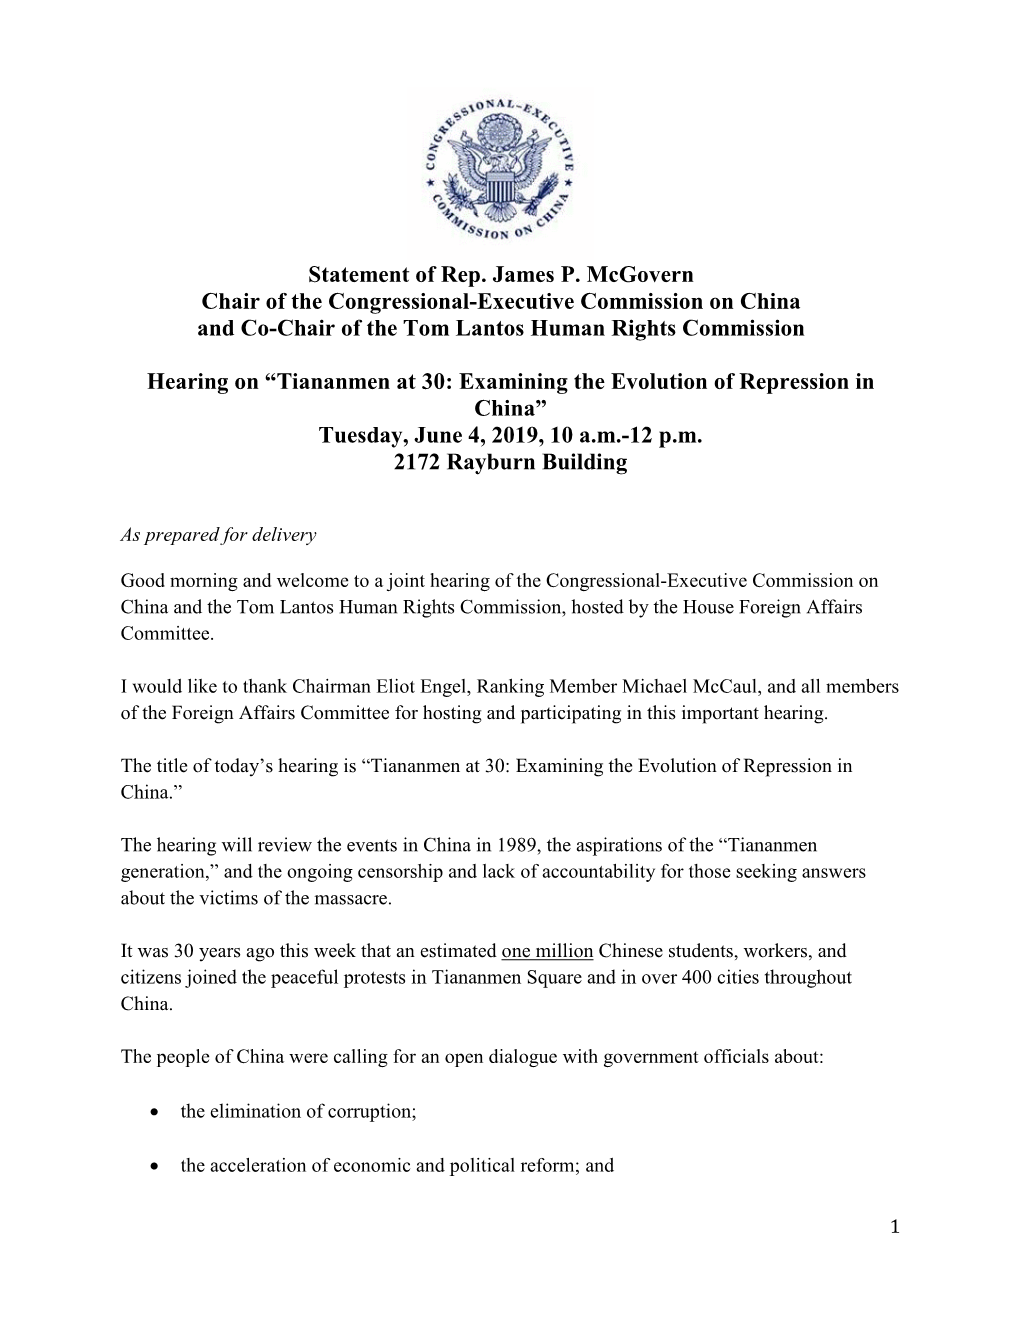 Statement of Rep. James P. Mcgovern Chair of the Congressional-Executive Commission on China and Co-Chair of the Tom Lantos Human Rights Commission